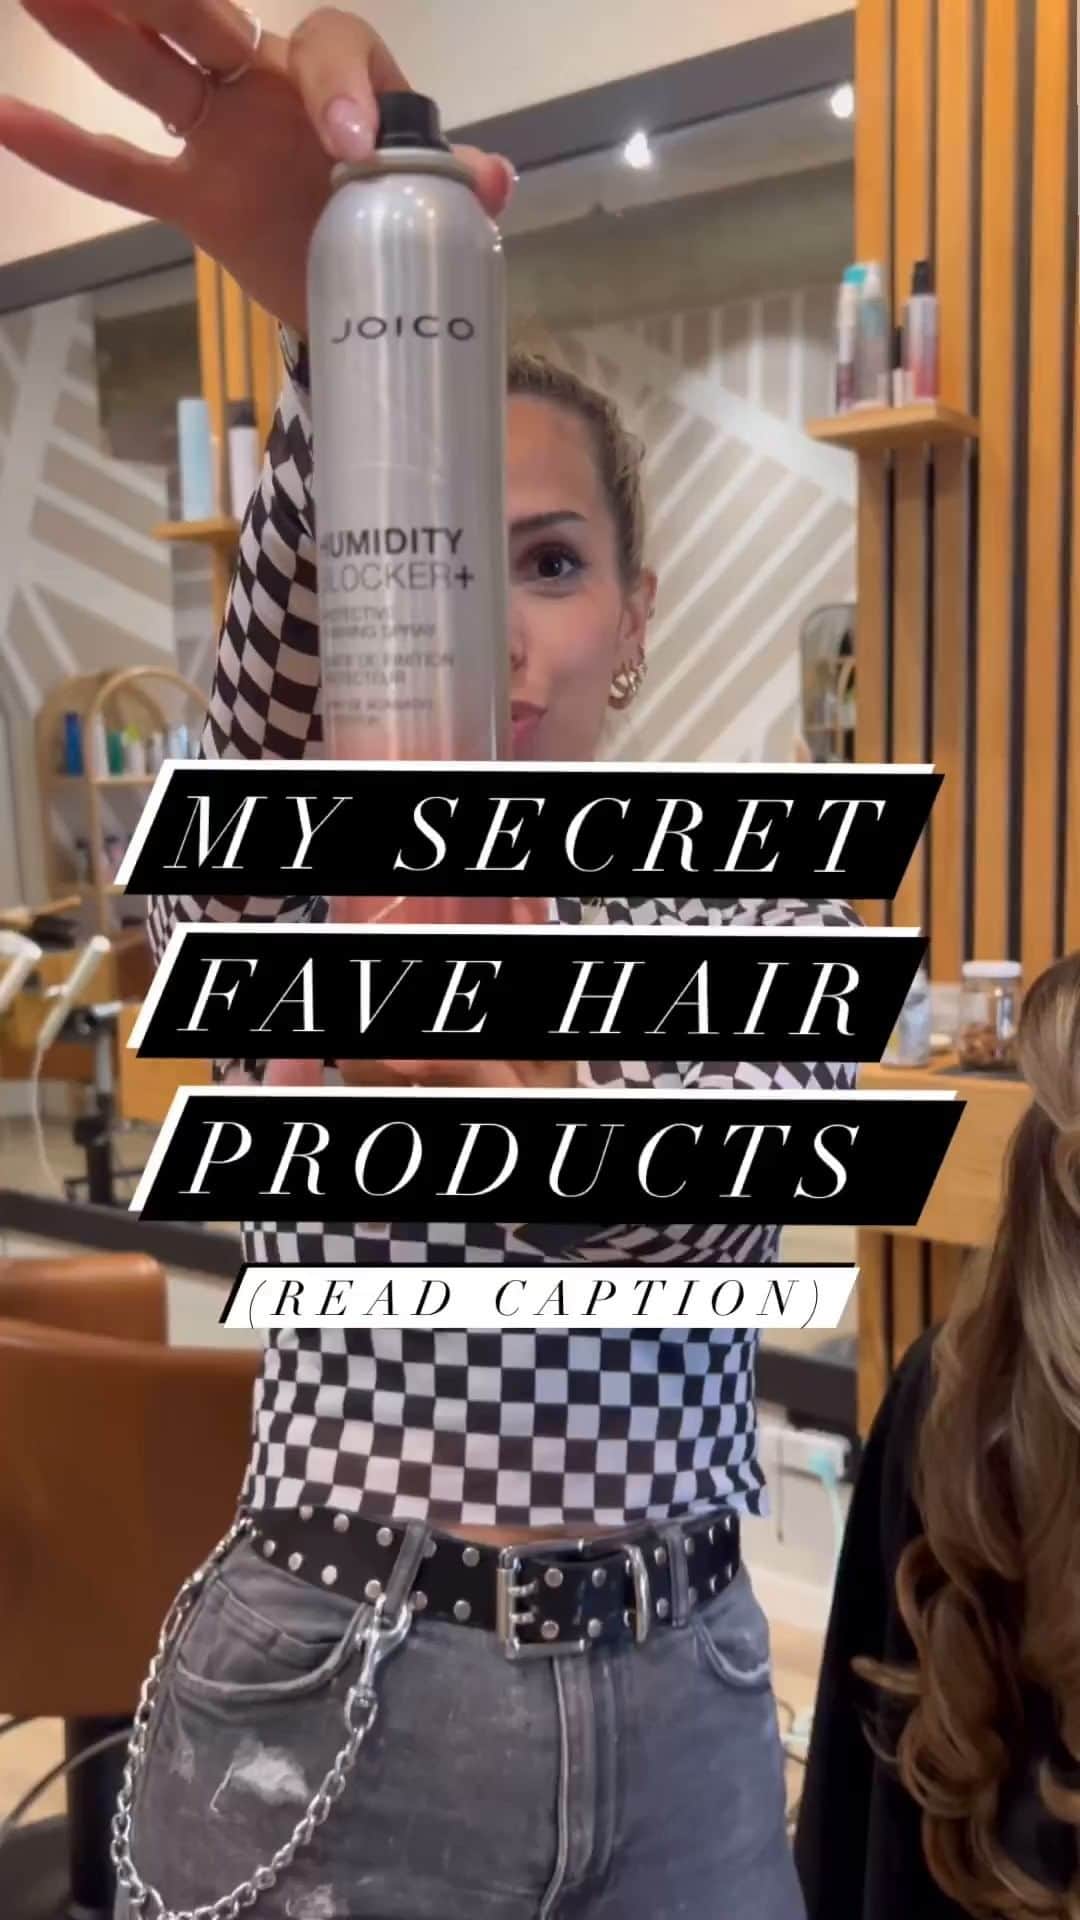 CosmoProf Beautyのインスタグラム：「Holiday blow out season is upon us, check out how @MaiMaiHair uses @Joico products to create a bouncy voluminous blow out!  Products Used: ► Joifull Shampoo ► Joifull Conditioner ► Joifull Leave-In Treatment (2 pumps on the roots) ► Youth Lock Blowout Creme (2 pumps mid-shaft down) ► K-Pak Oil (2 pumps mid-shaft down)  Steps: ► Blow dry.  ► Spray Humidity Blocker.  ► Pin up curls to set. ► Let it cool off, spray again and unpin … Done !!  This holiday season, take advantage of our Buy Online and Pick Up In Store service, 2-hour delivery, or shop online at www.CosmoProfBeauty.com.  #CosmoProf #HolidaysAtCosmoProf #BlowOut #HolidayBlowOut #Joico #HairEducation #BehindTheChair #StylistHacks #SalonTips #HairEducator #HairClass #SalonEducation」